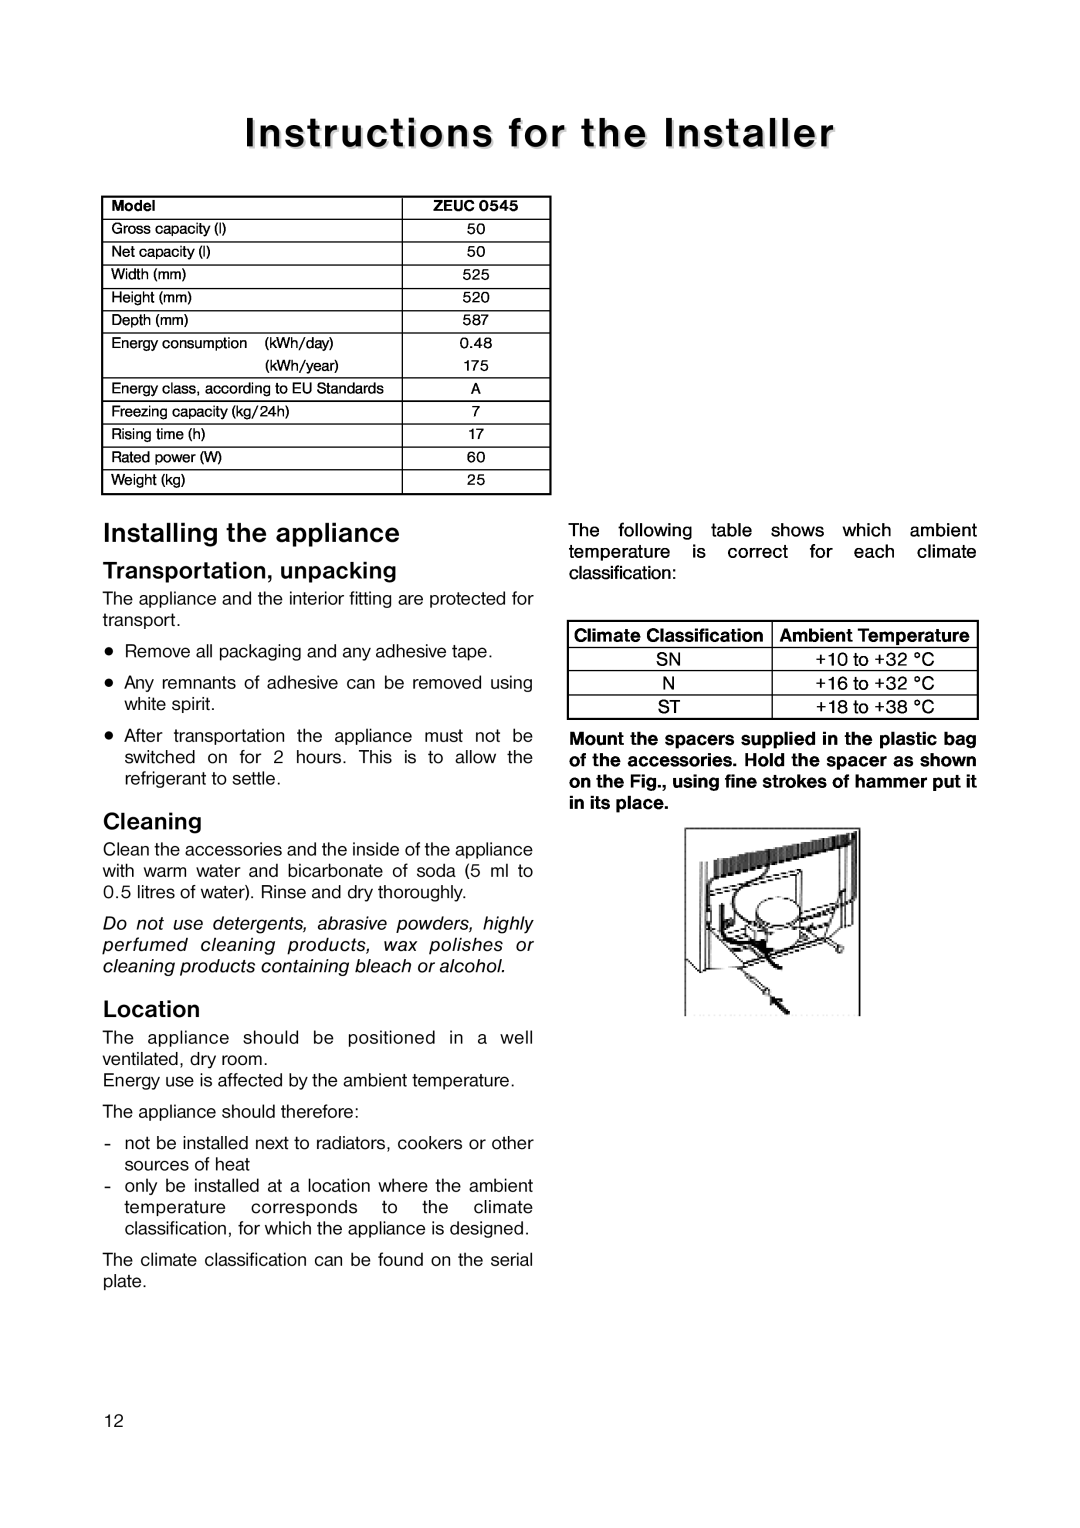 Zanussi ZEUC 0545 Instructions for the Installer, Installing the appliance, Transportation, unpacking, Cleaning, Location 